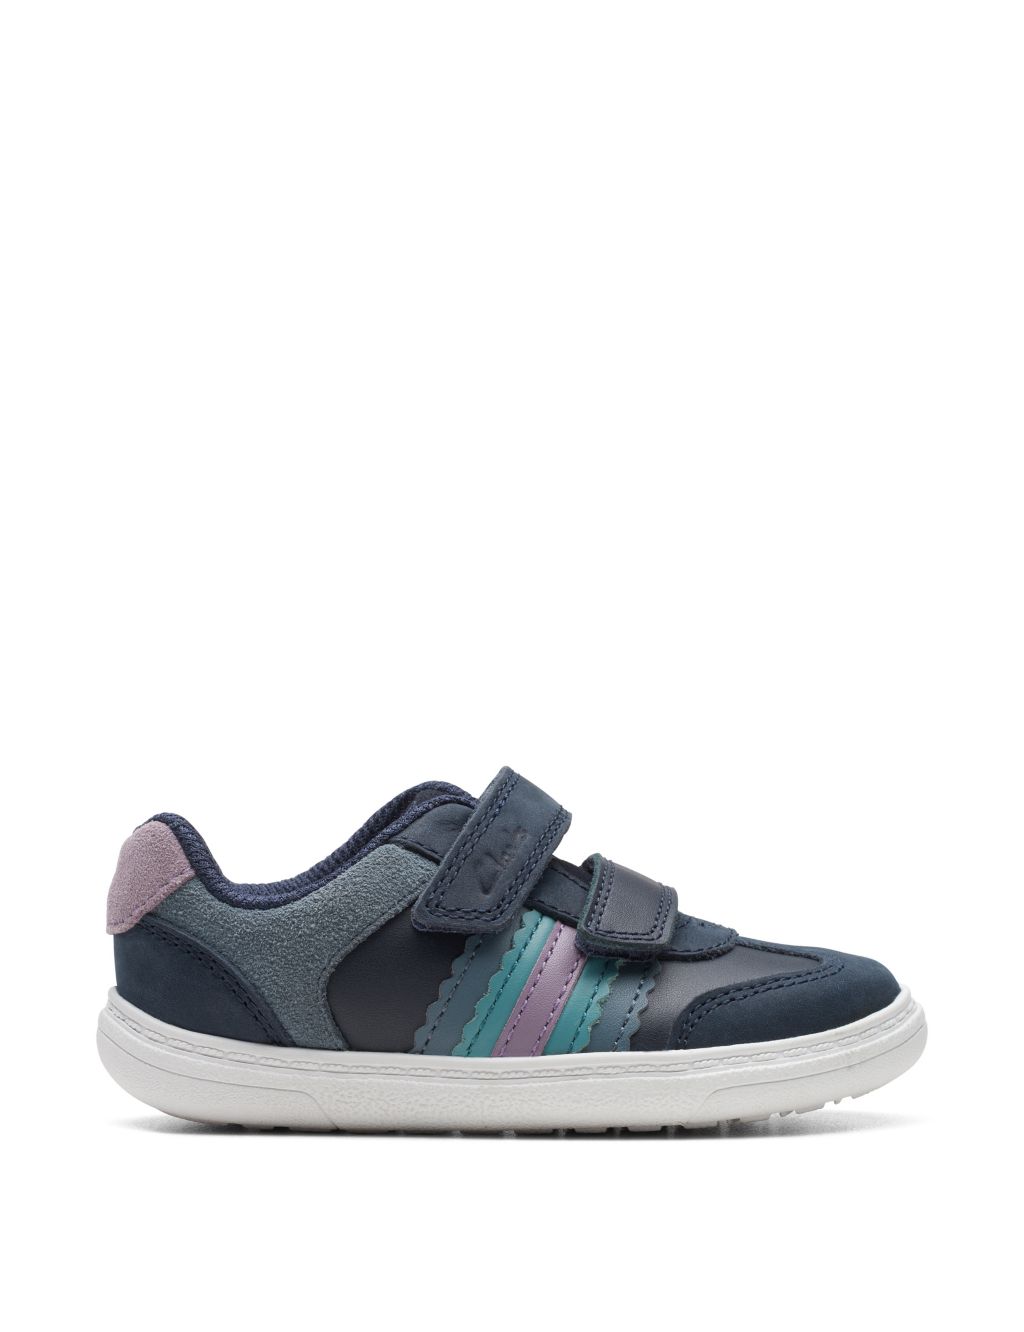 Kids' Leather Colour Block Riptape Trainers (3 Small - 6 ½ Small) image 1